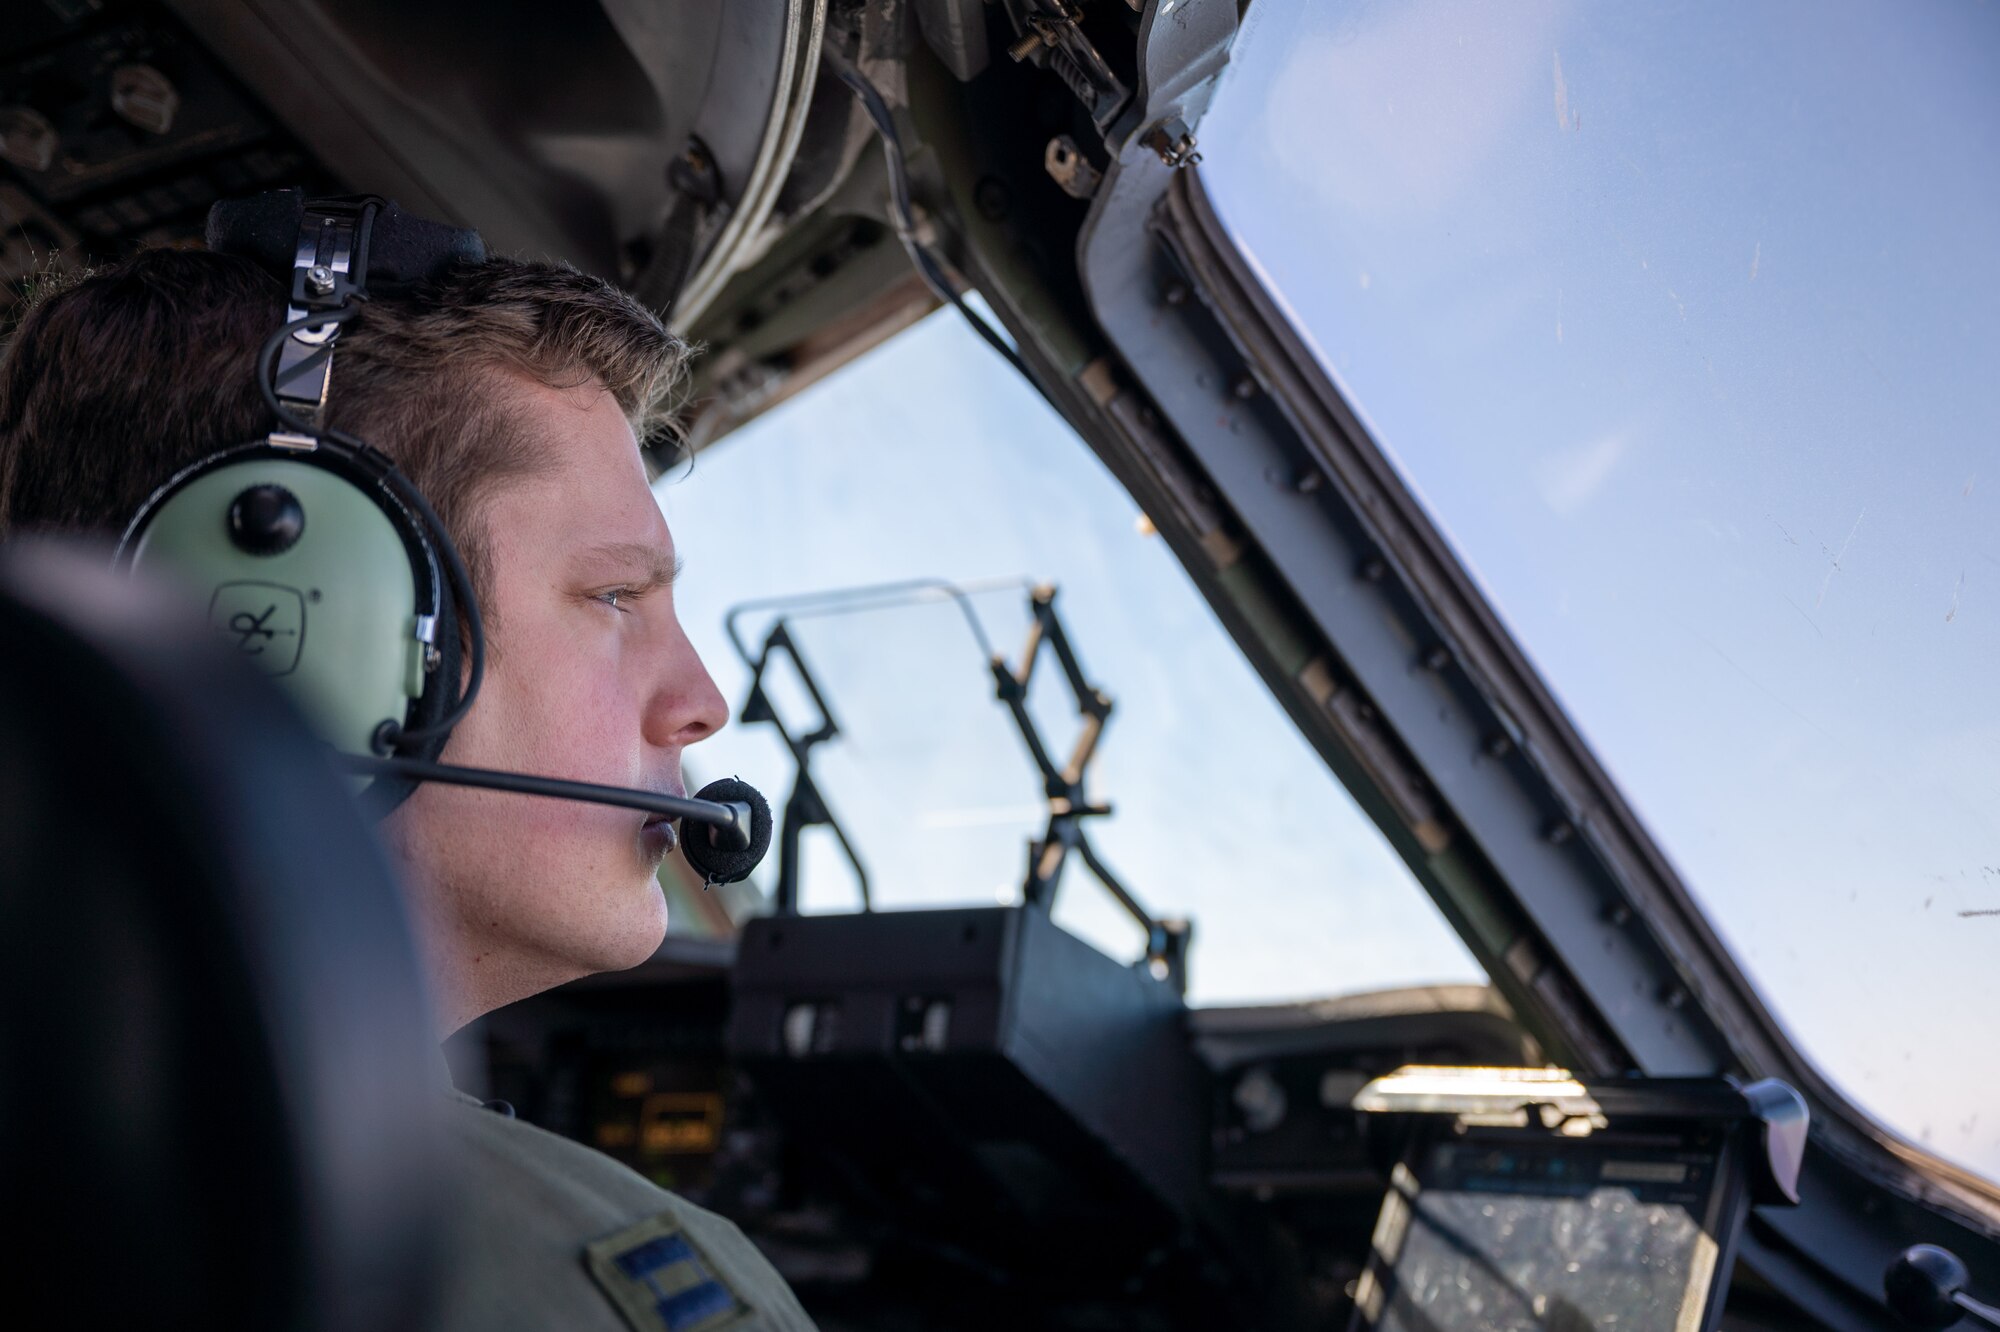 Capt. Michael Giordano, 6th Airlift Squadron pilot, flies a Dover Air Force Base C-17 Globemaster III during exercise Mosaic Tiger, Feb. 24, 2021. Airmen from Joint Base McGuire-Dix-Lakehurst, New Jersey and Dover AFB, Delaware participated in the exercise, led by the 23d Wing at Moody AFB, Georgia, that tested simulated downrange capabilities to build mission-essential skills to support the needs of Air Combat Command and Air Mobility Command. (U.S. Air Force photo by Airman 1st Class Faith Schaefer)